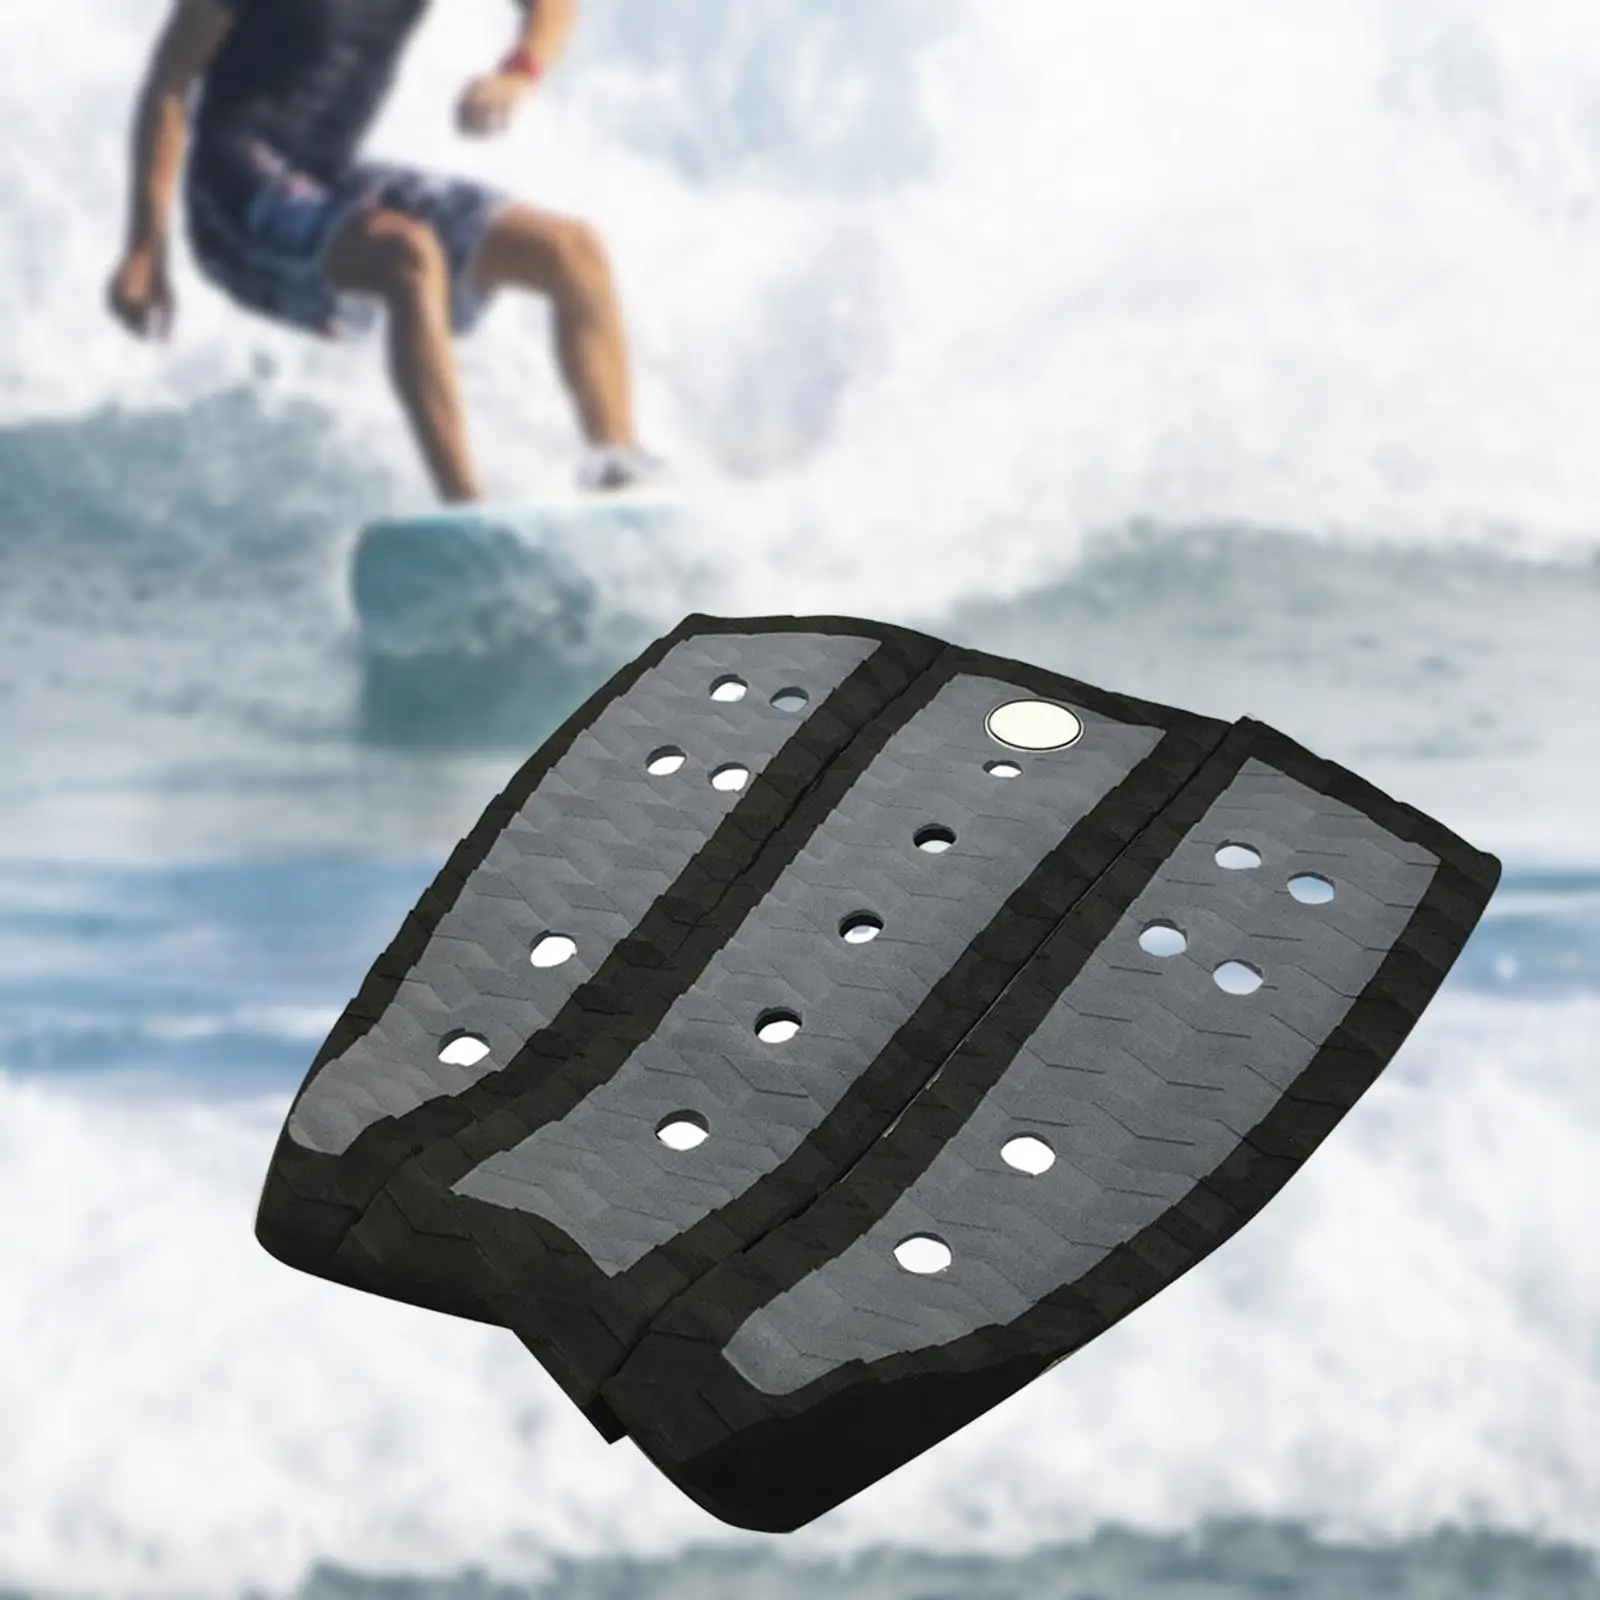 3Pcs Lightweight Surfboard Traction Pad Surfing Padding Deck Pad Grip Premium Tail Pad for Funboard Paddle Board Skimboards